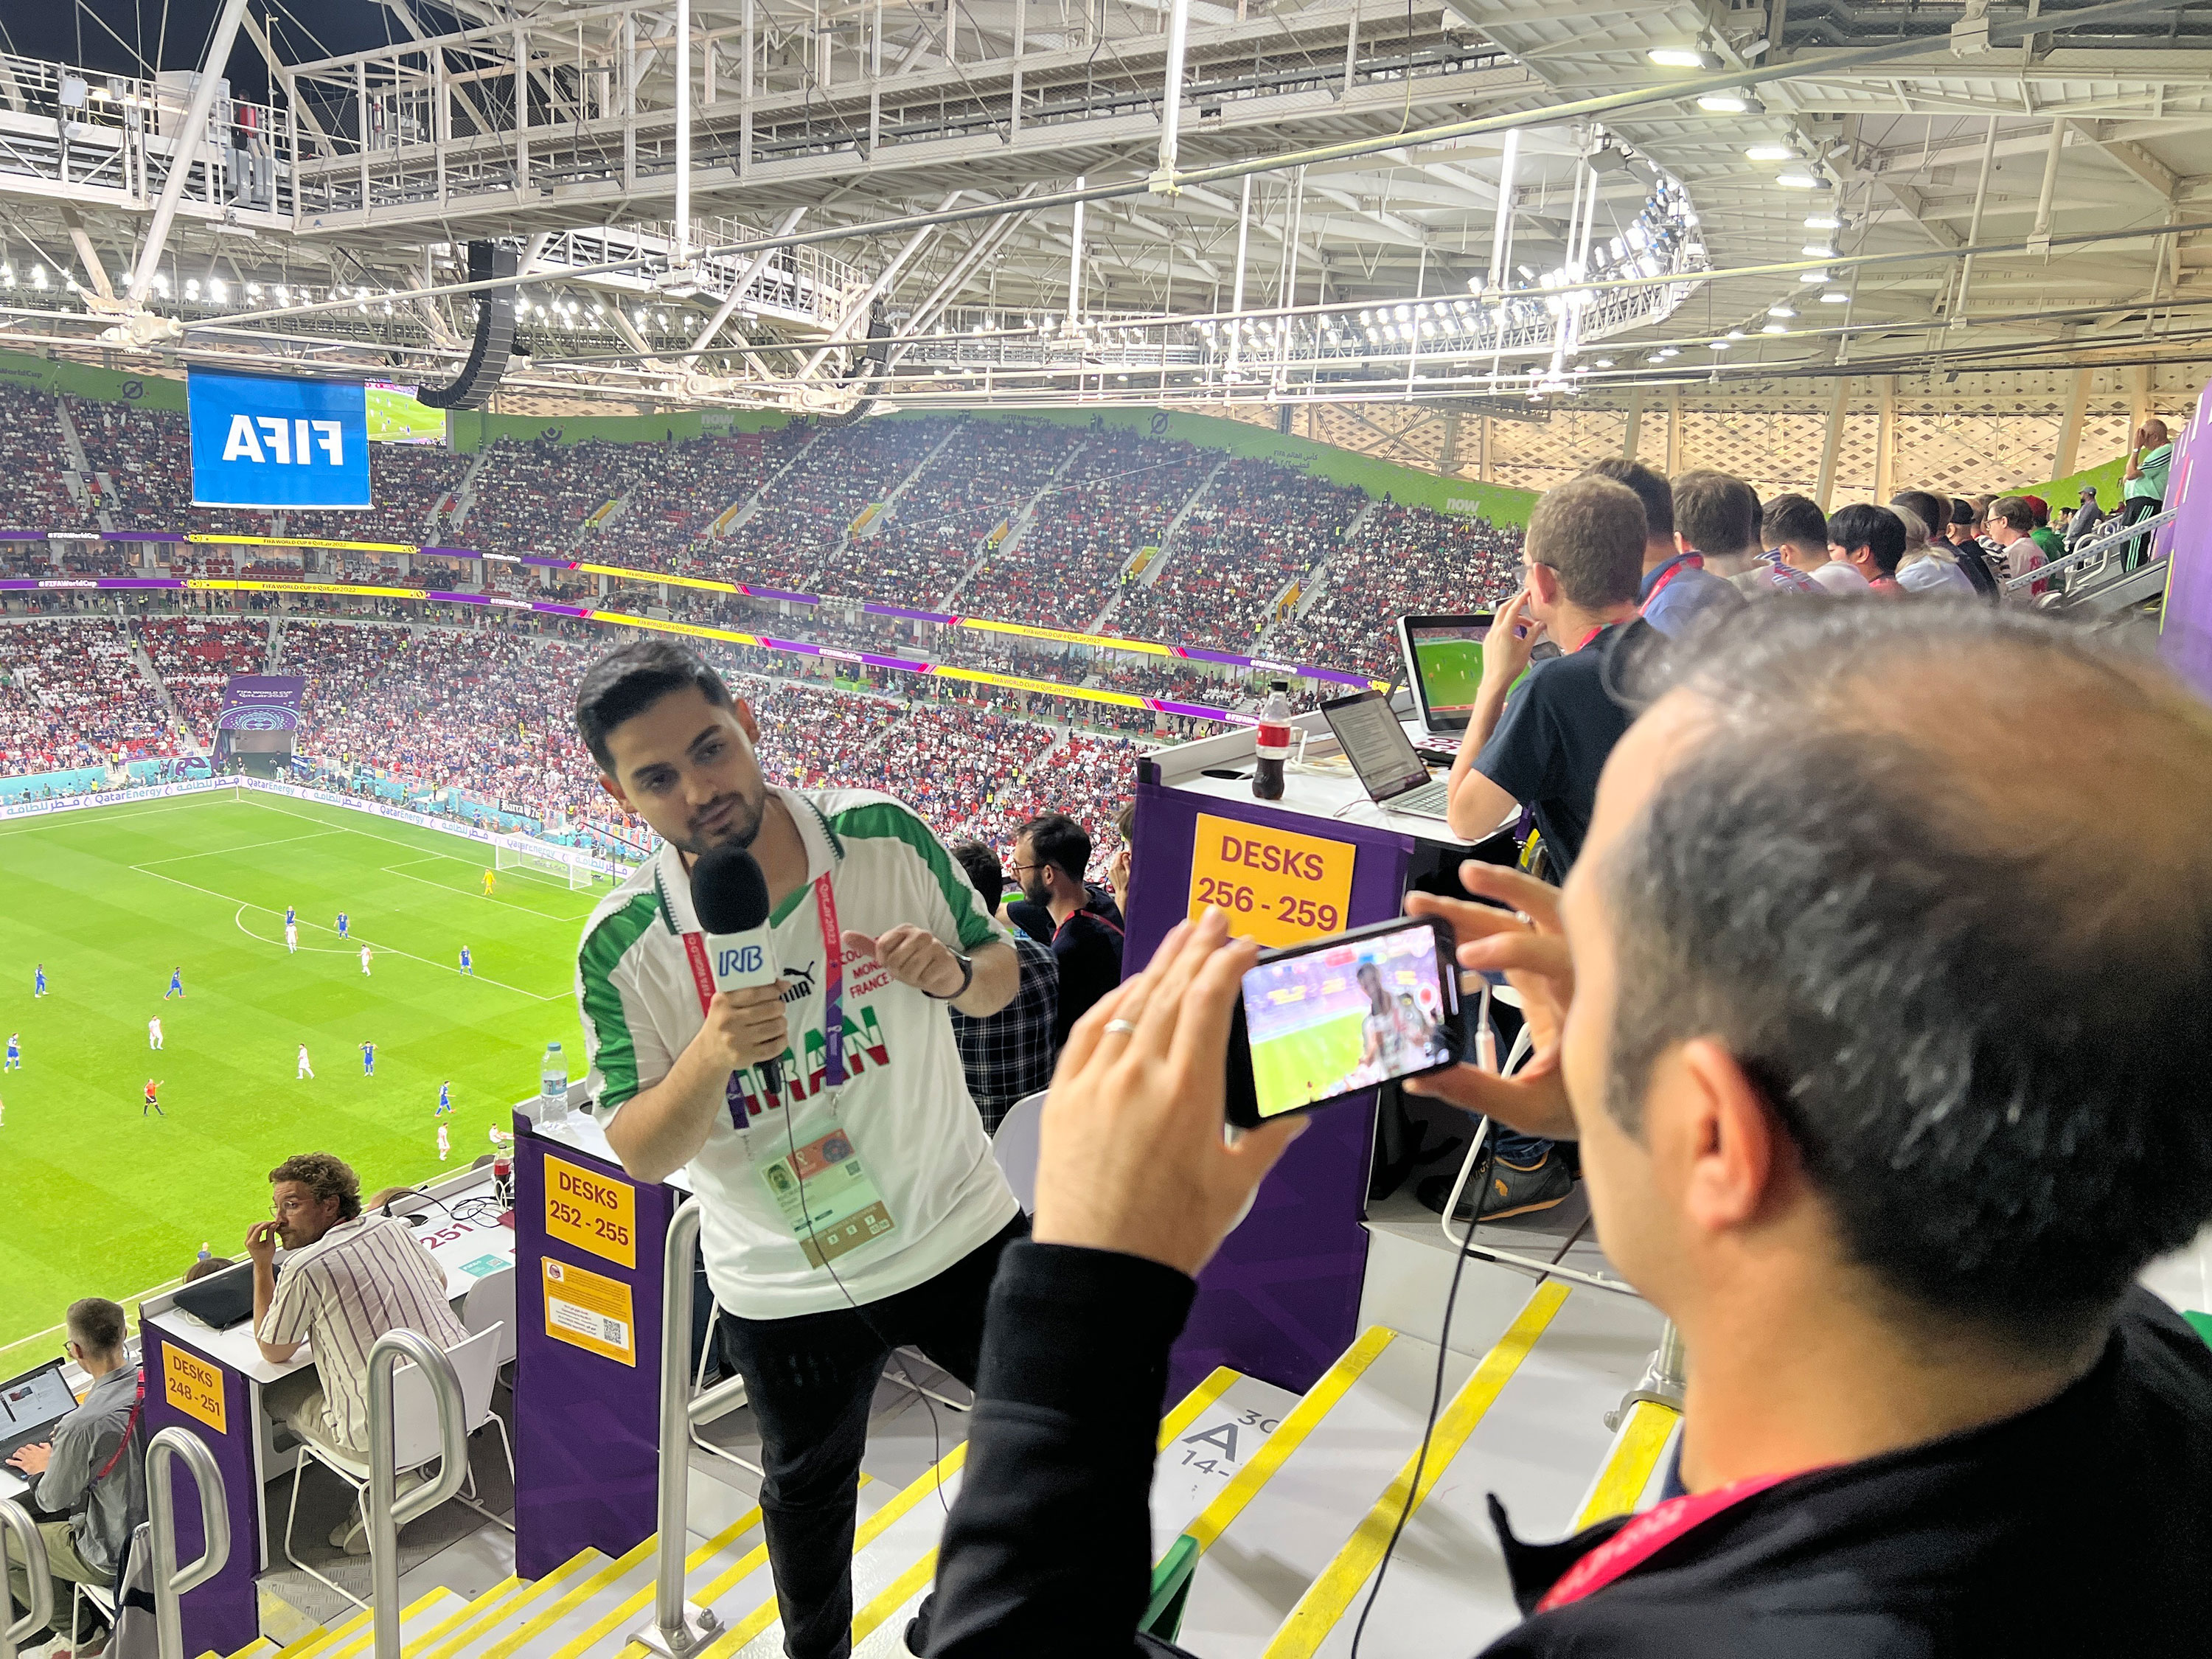 Iranian state media (IRIB) reported from inside the match, wearing the 1998 World Cup jersey. They hope to repeat that night in France, when Iran beat the United States.